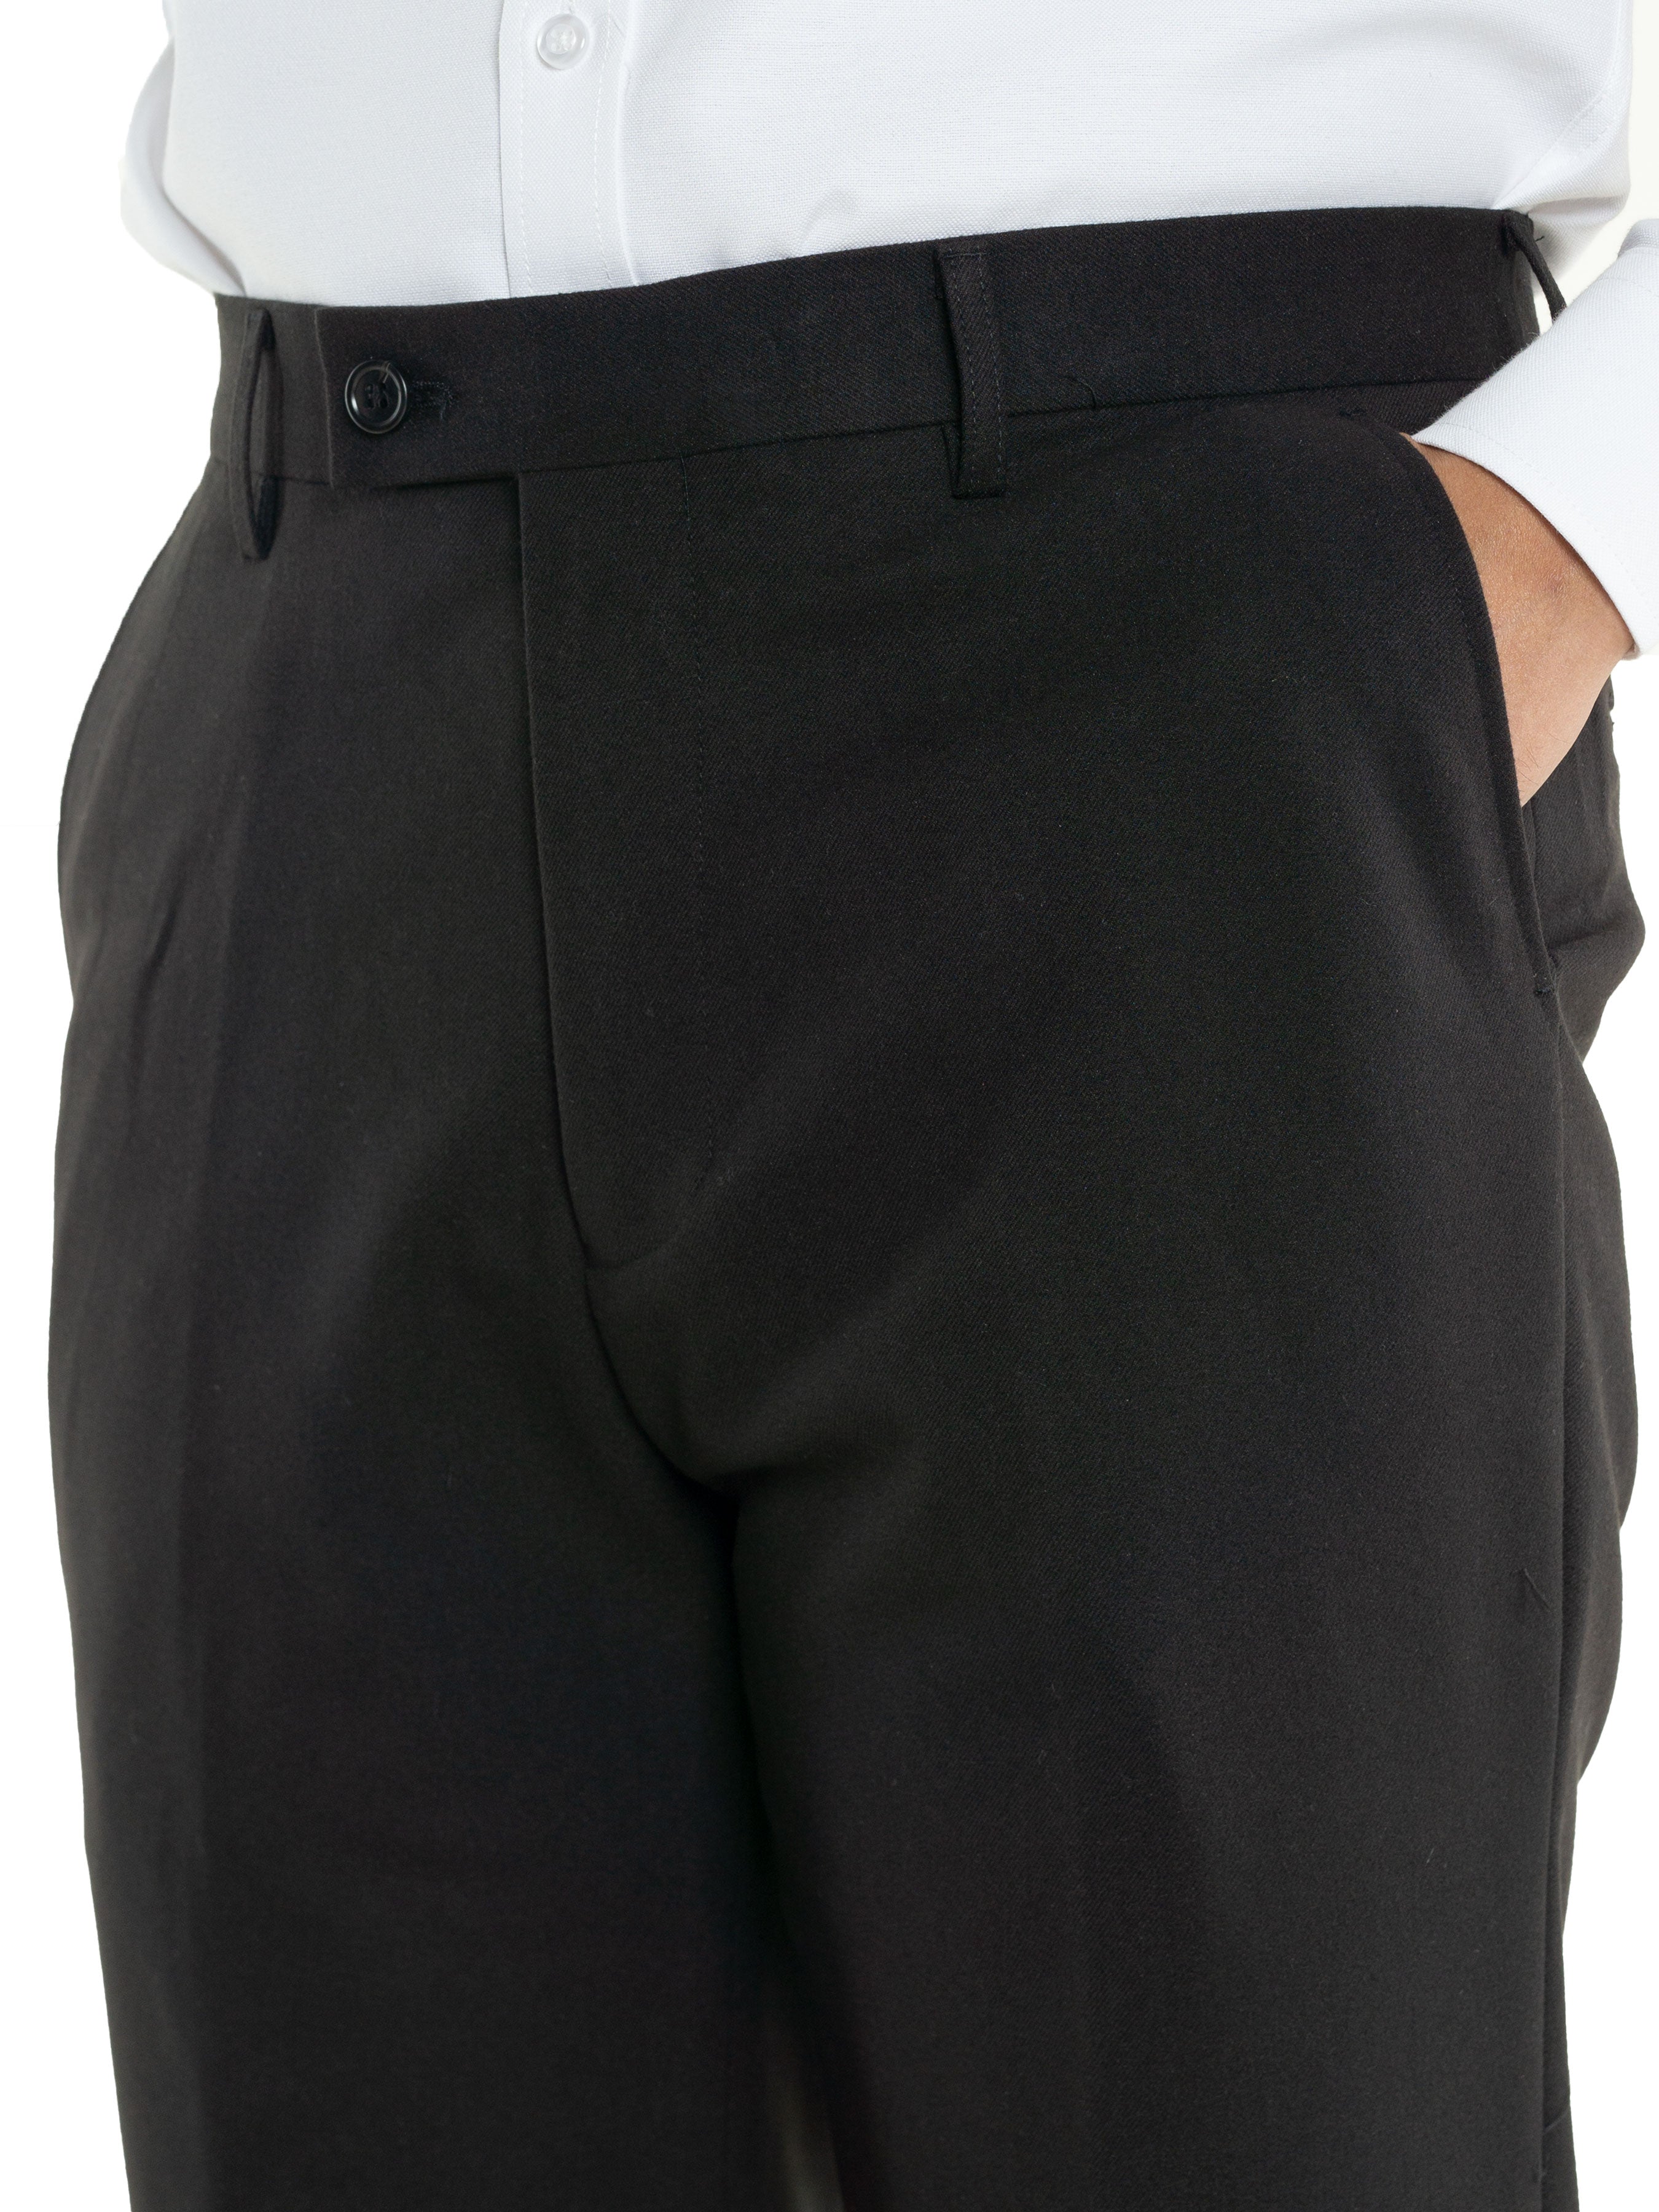 Trousers With Belt Loop -  Black Charcoal Plain (Stretchable) - Zeve Shoes